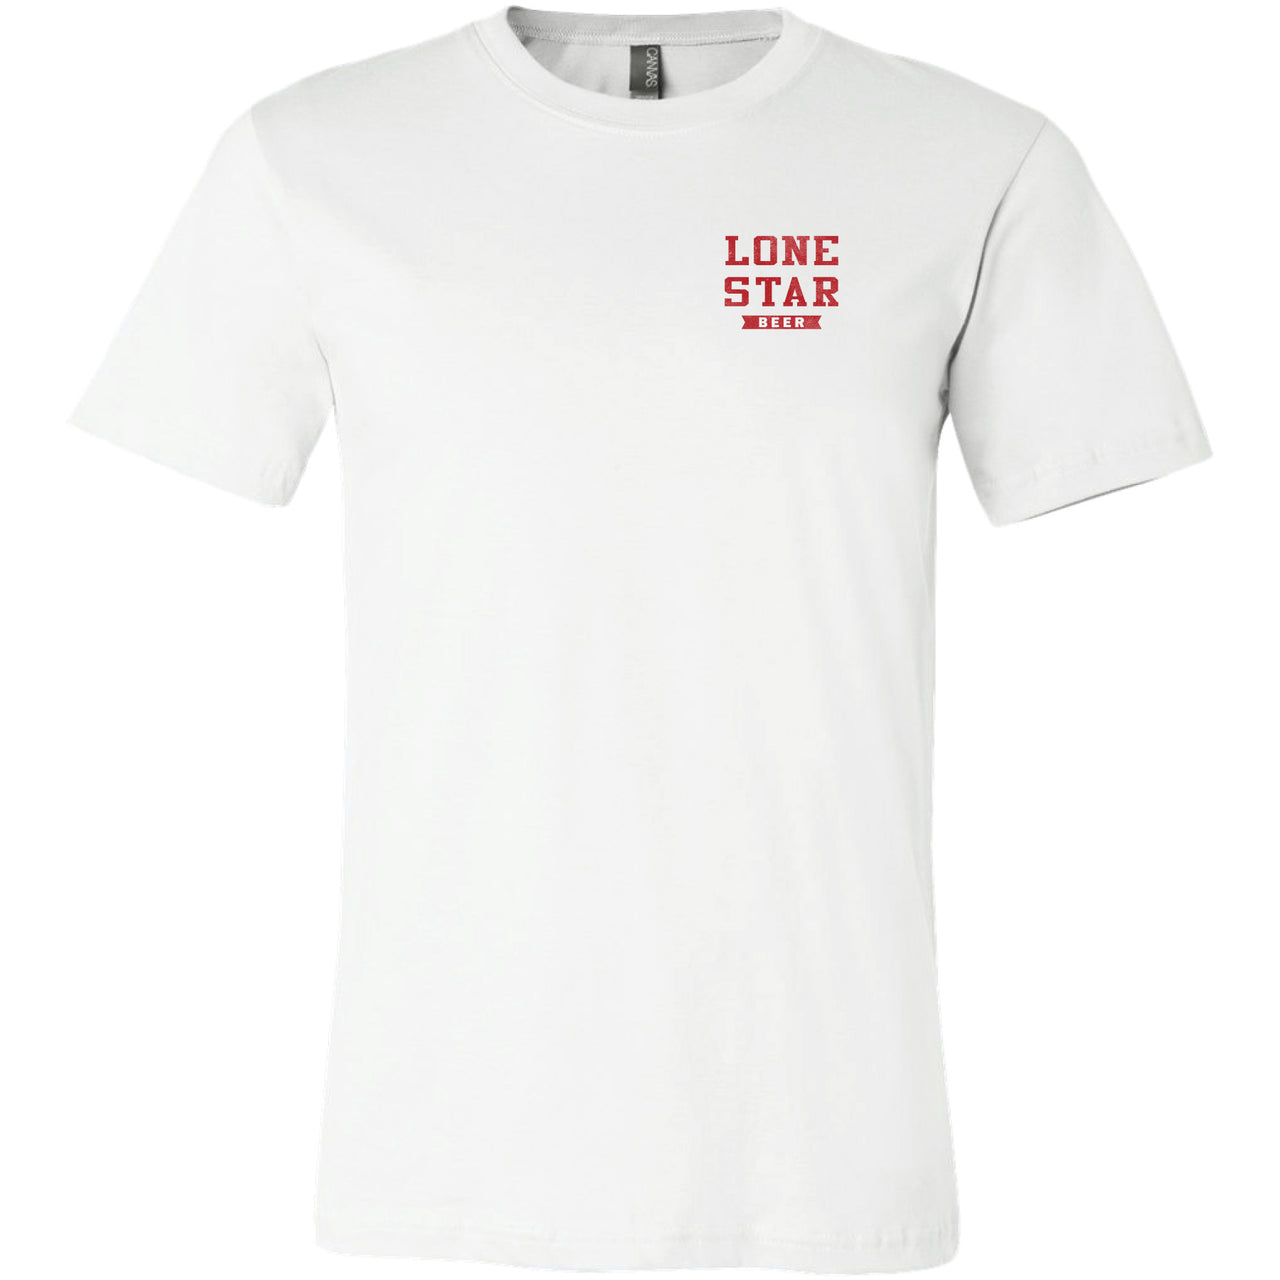 Lone Star - Vintage Label 2-Sided T-shirt